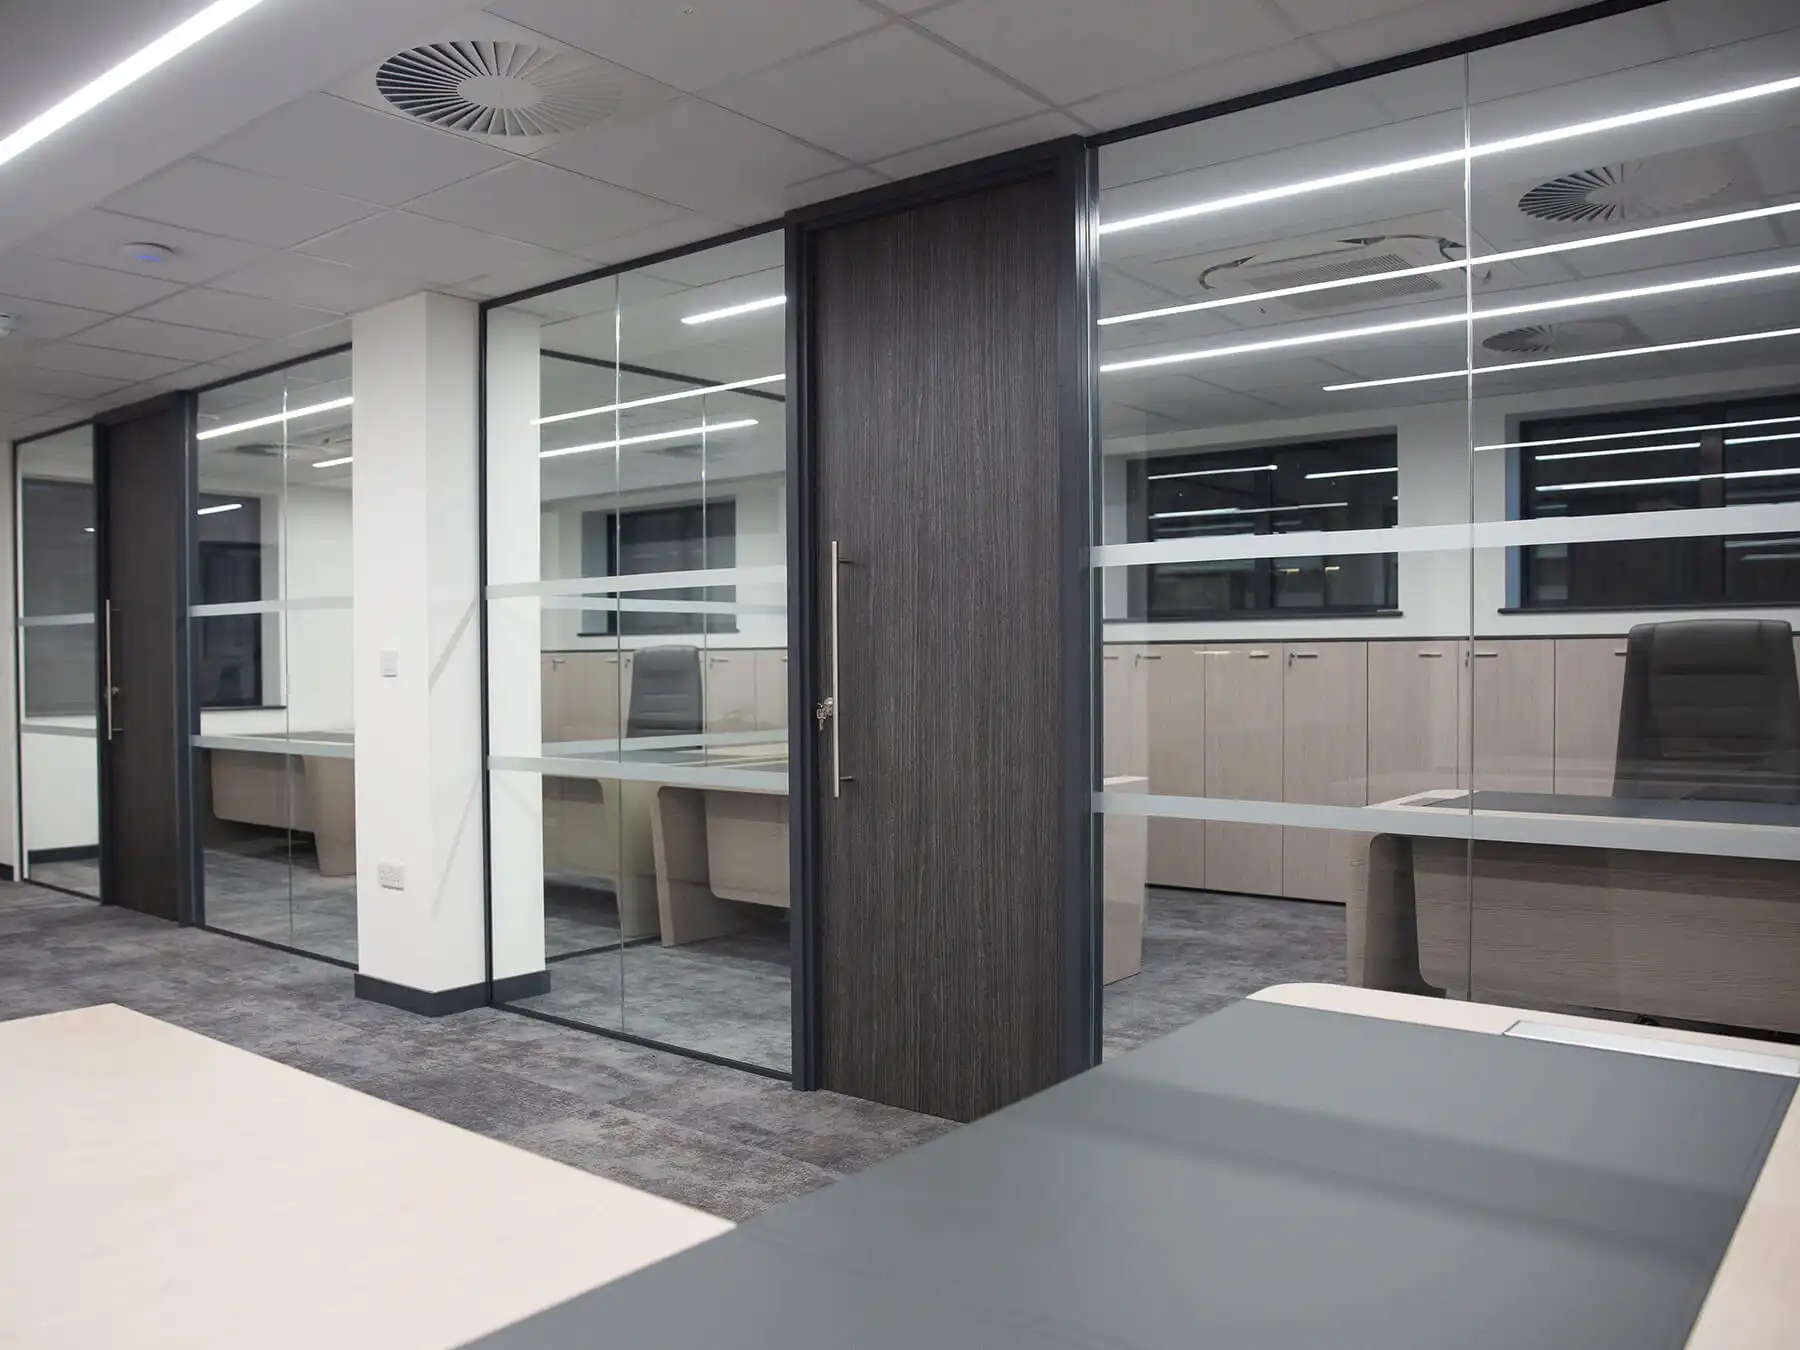 Executive work spaces divided with double glazes partitions with solid doors